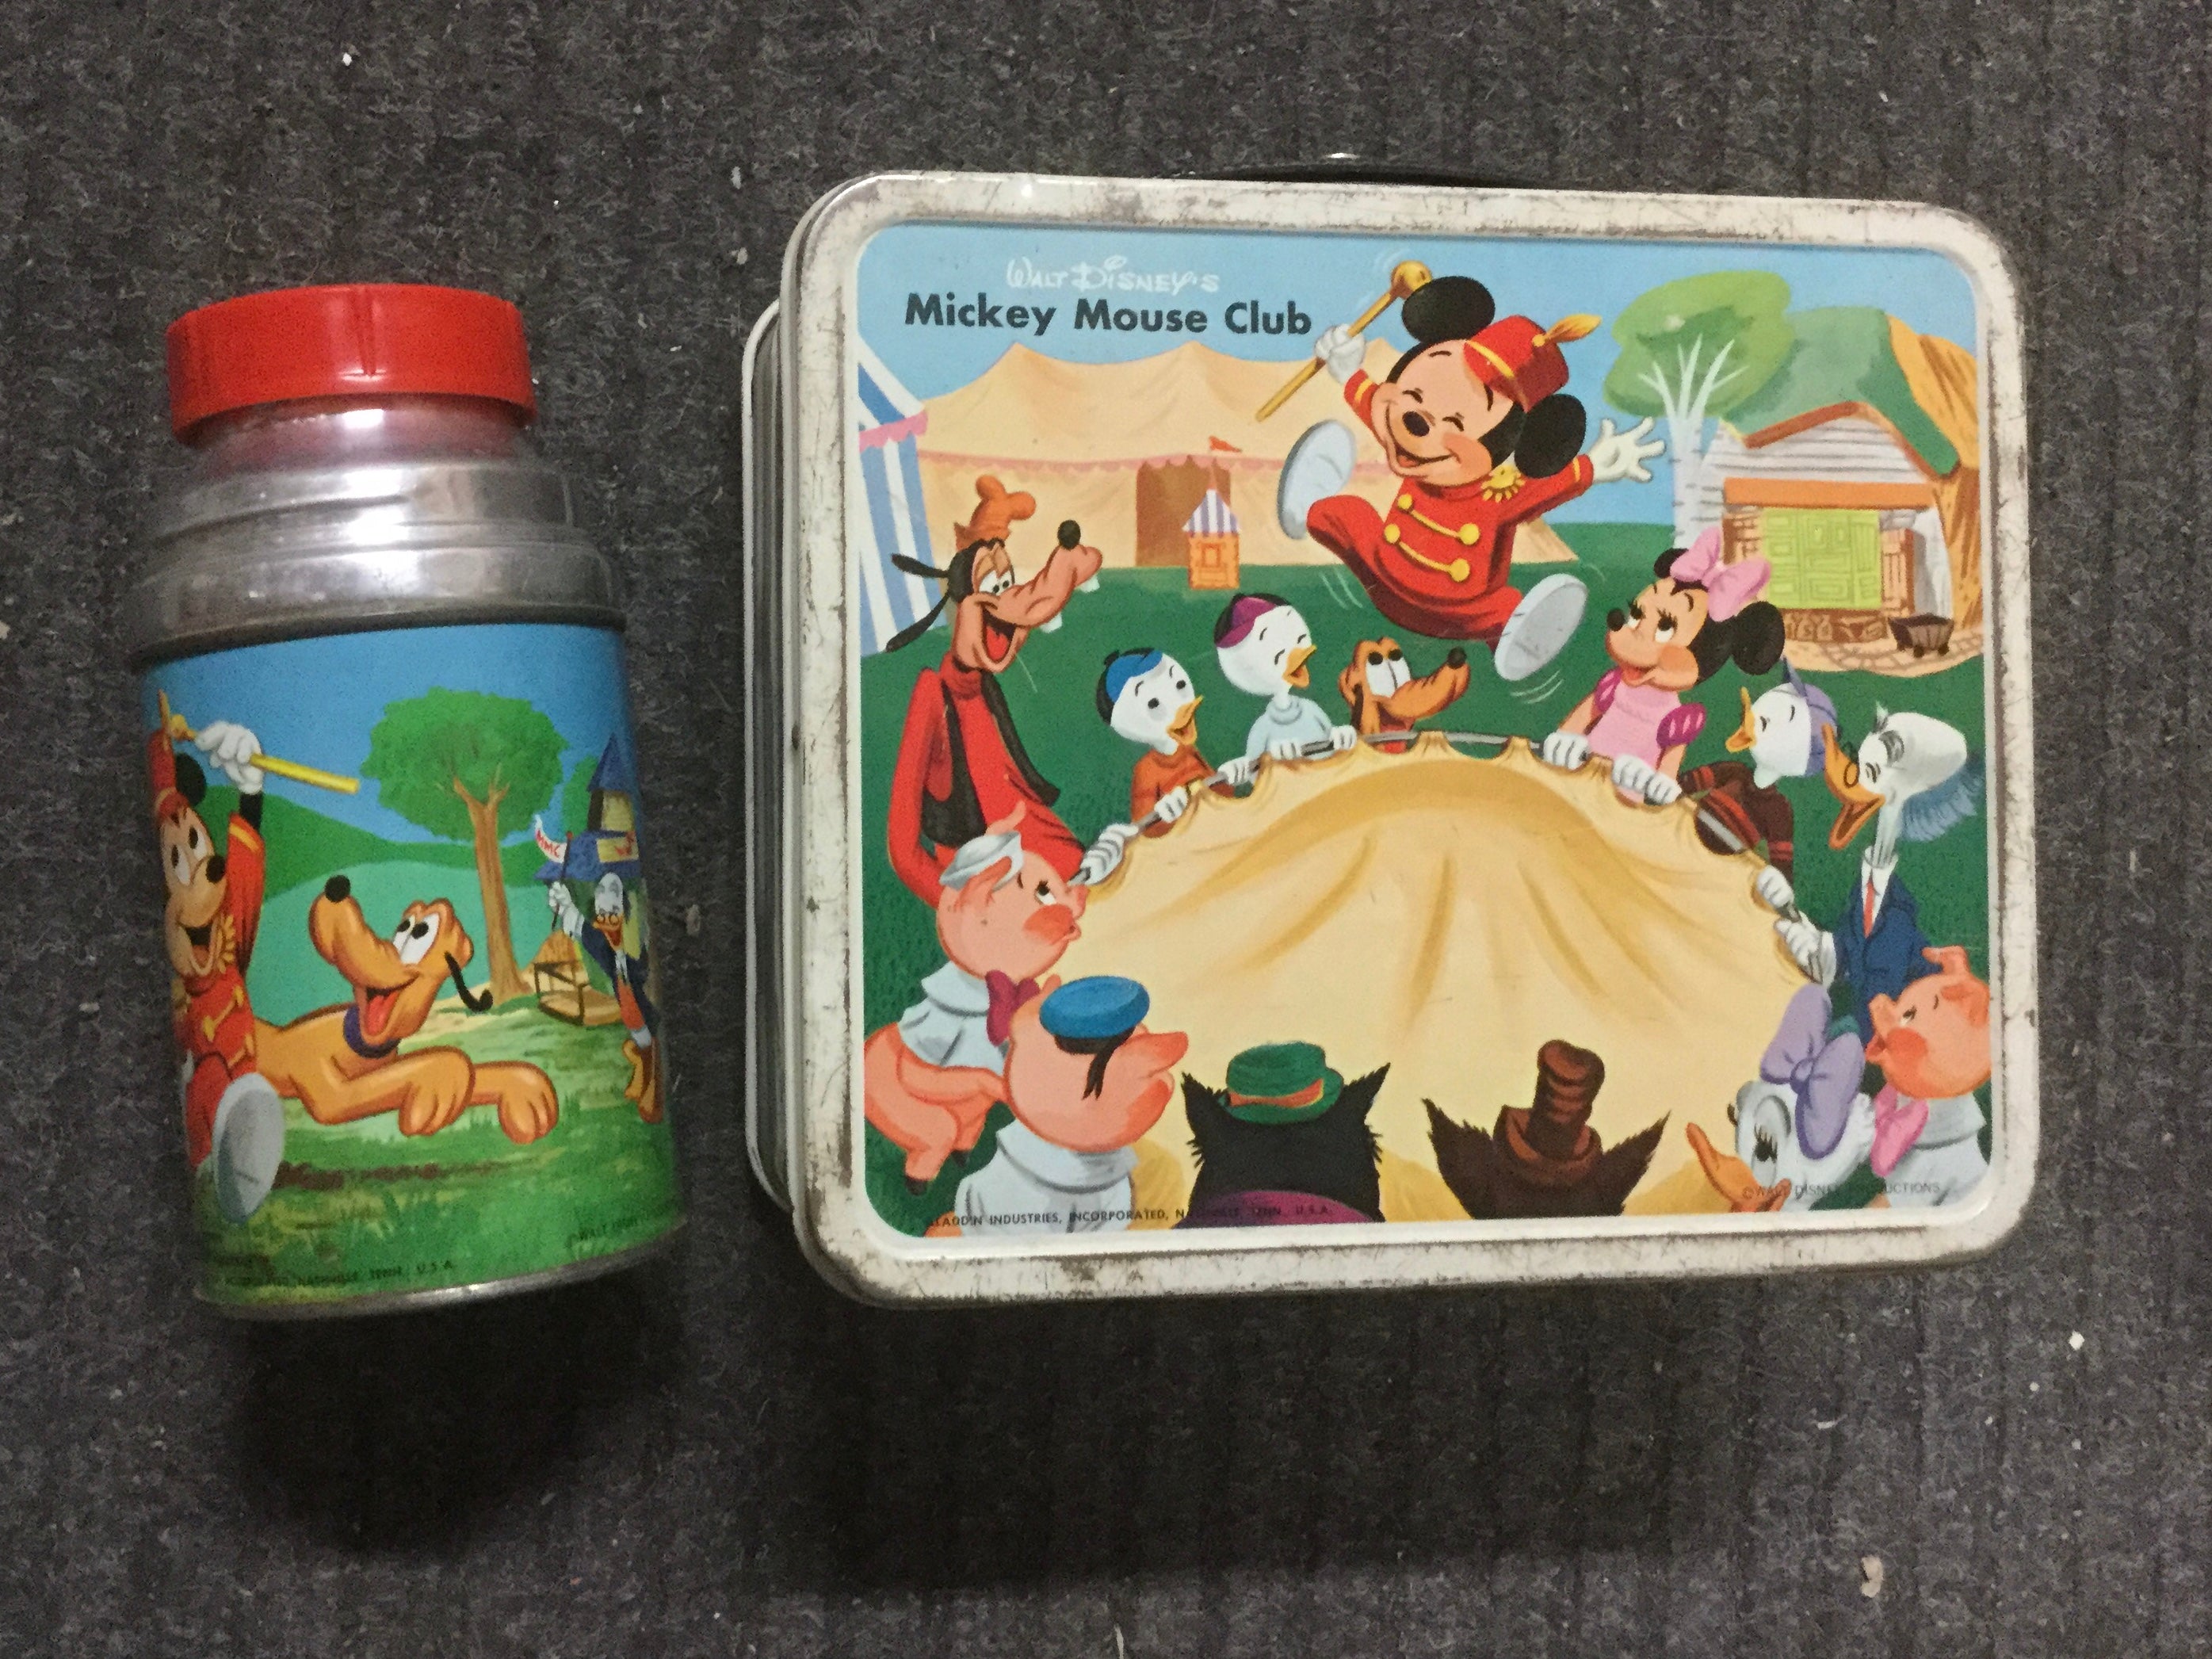 Mickey Mouse Club Rare Disney metal lunch box and metal Thermos 1960s